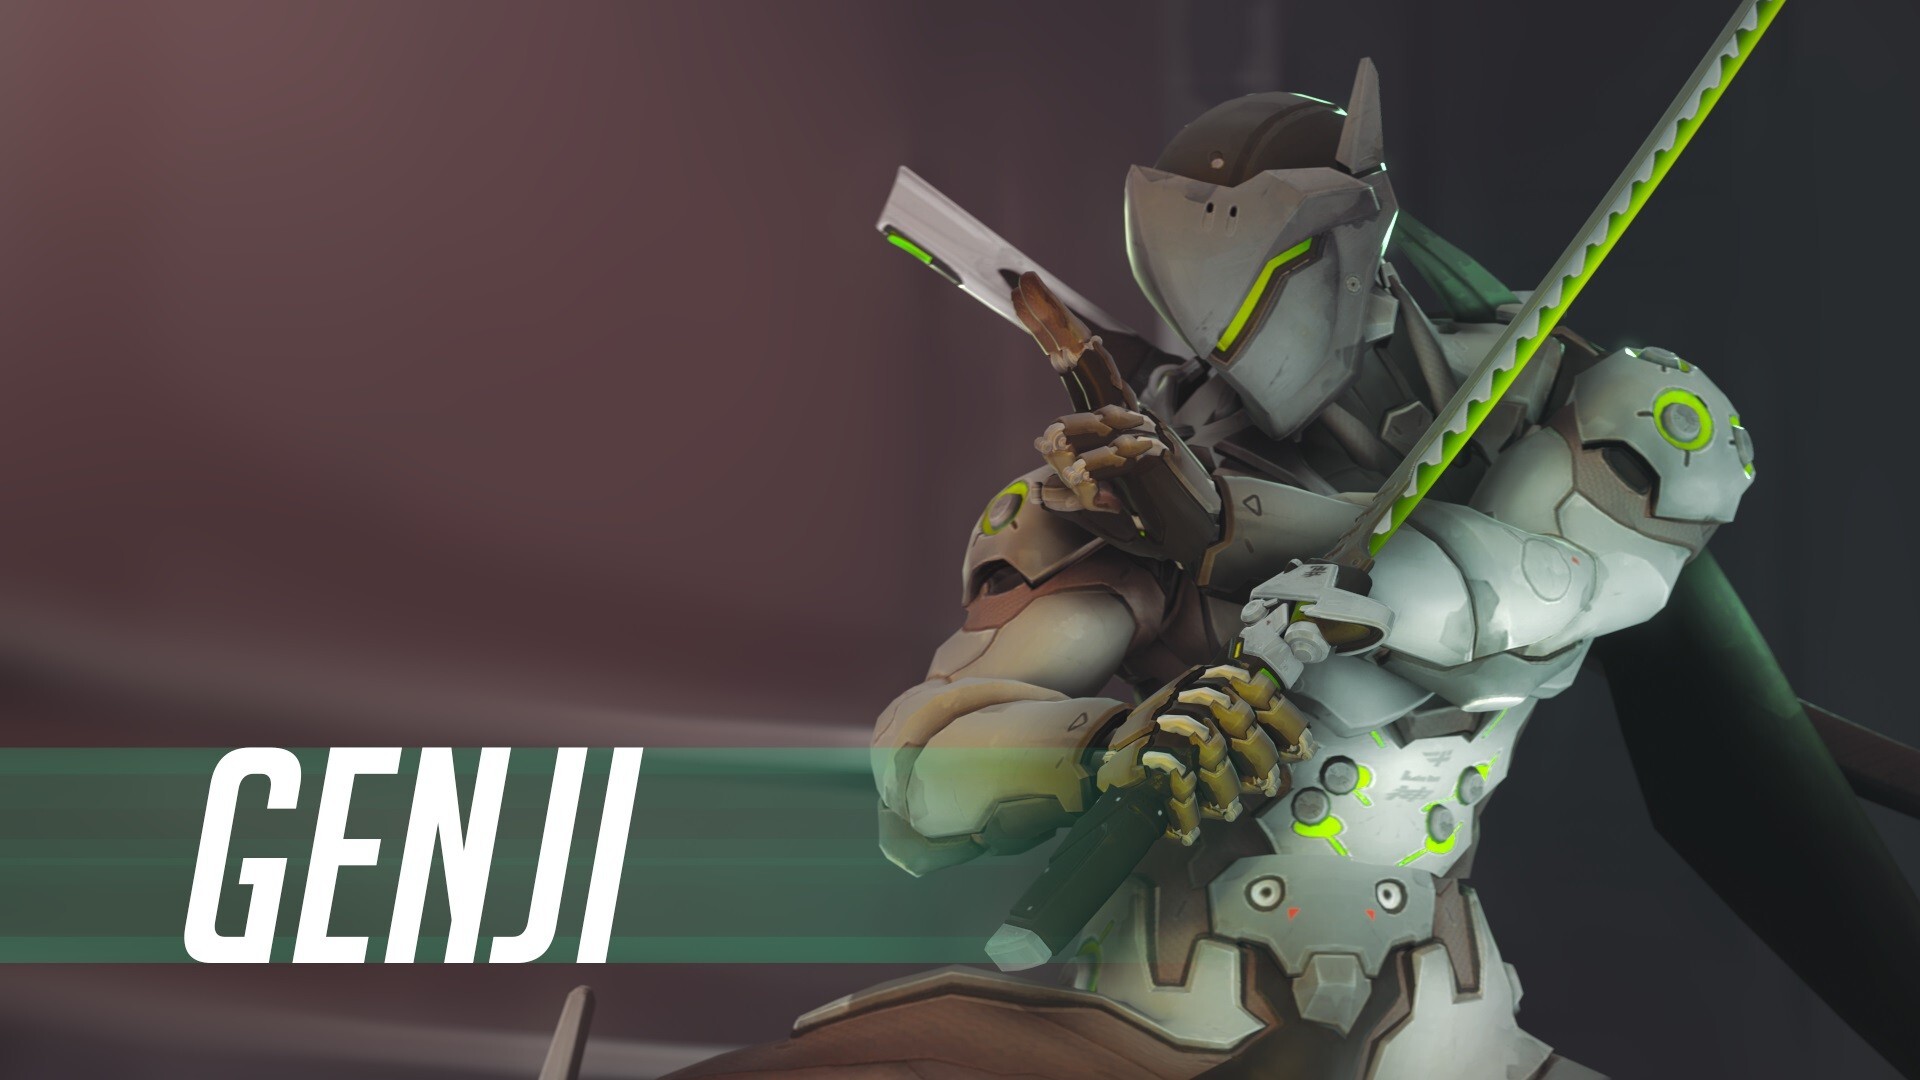 Genji: Shimada, Sparrow was trained in the ways of the sword by Asa Yamagami. 1920x1080 Full HD Wallpaper.